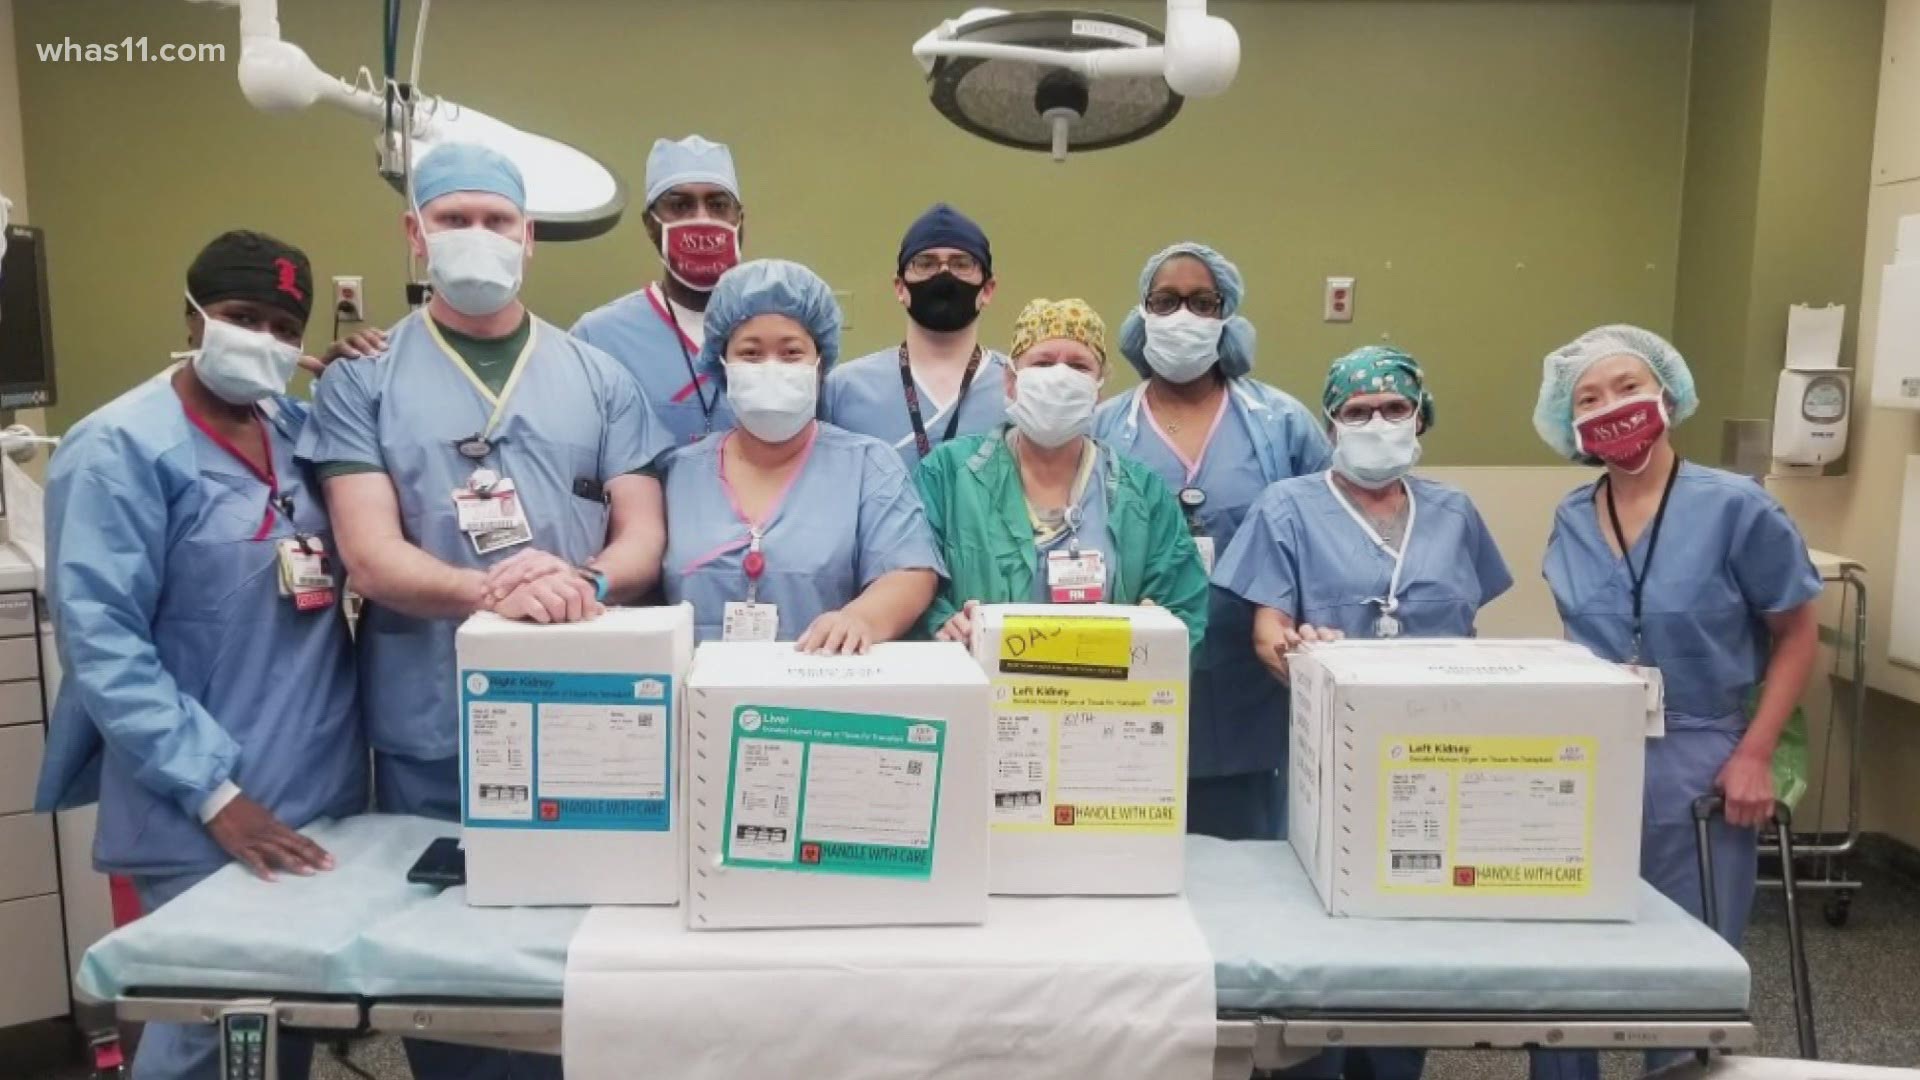 Despite COVID-19, a team of surgeons at Jewish Hospital transplanted six organs in just 25 hours.